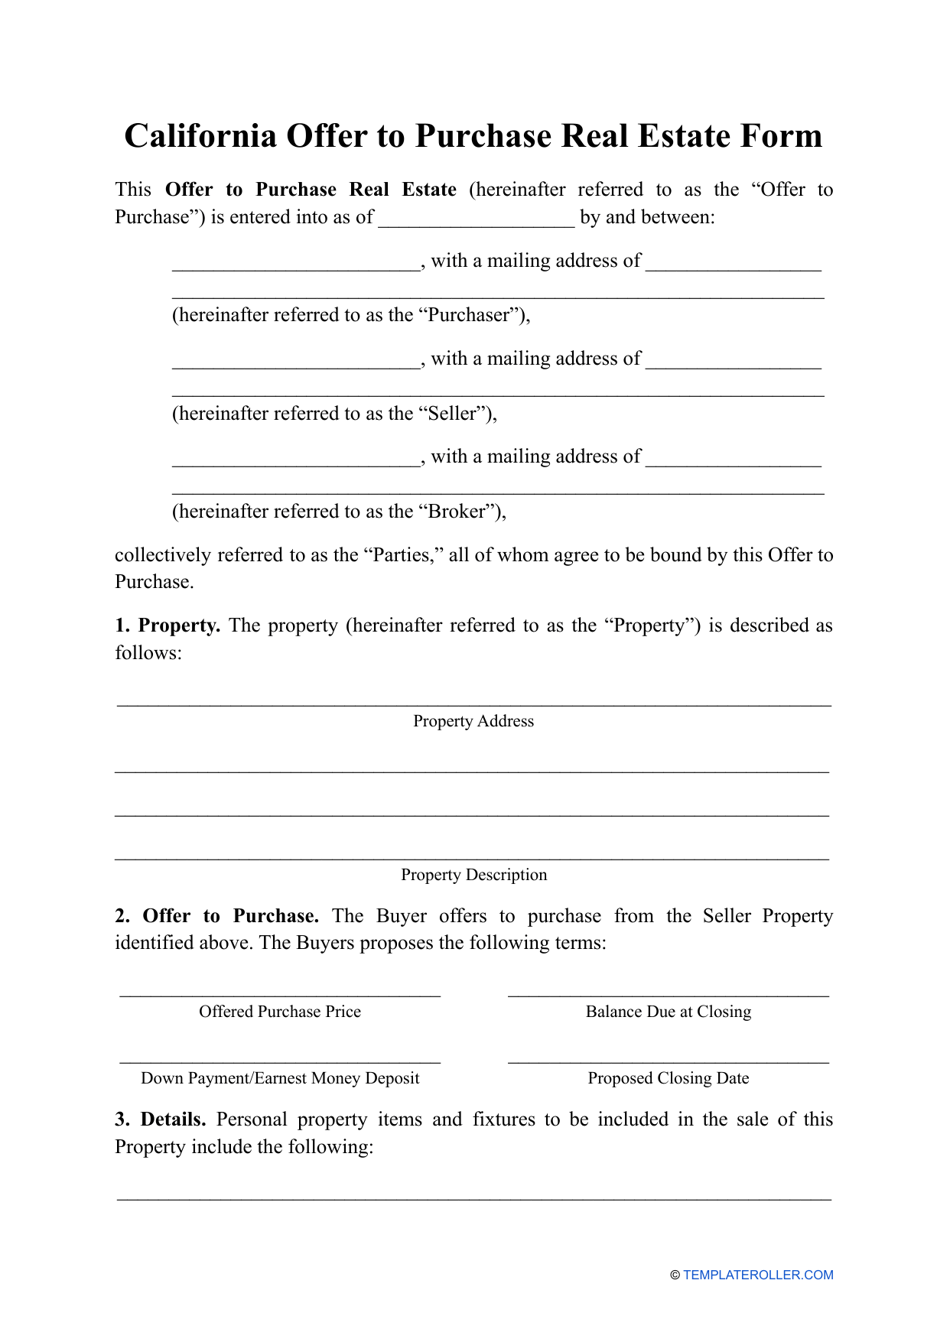 Offer to Purchase Real Estate Form - California, Page 1